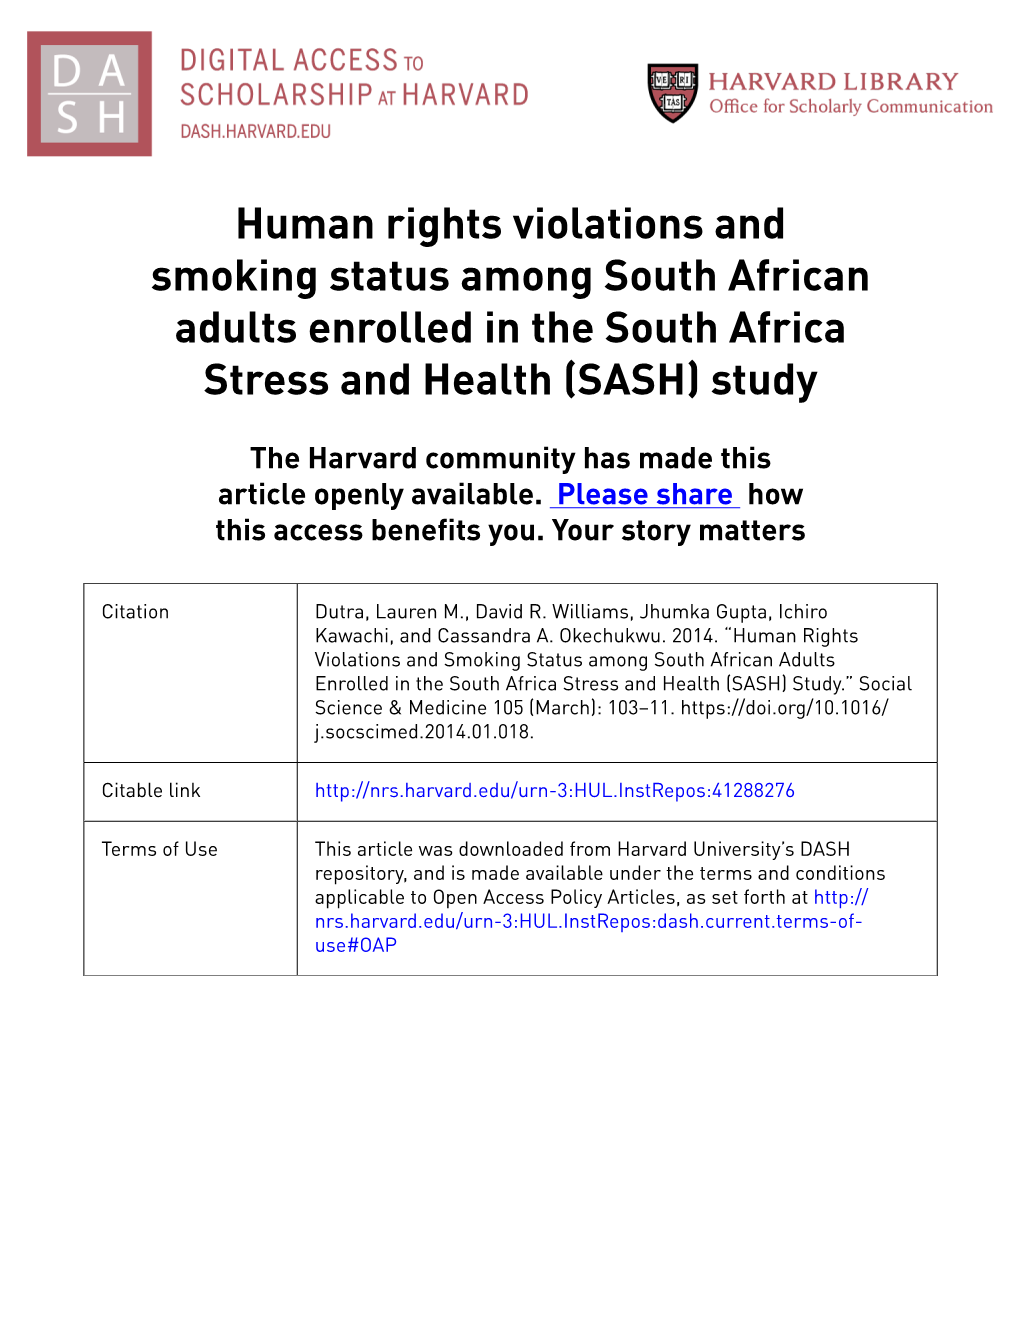 Human Rights Violations and Smoking Status Among South African Adults Enrolled in the South Africa Stress and Health (SASH) Study